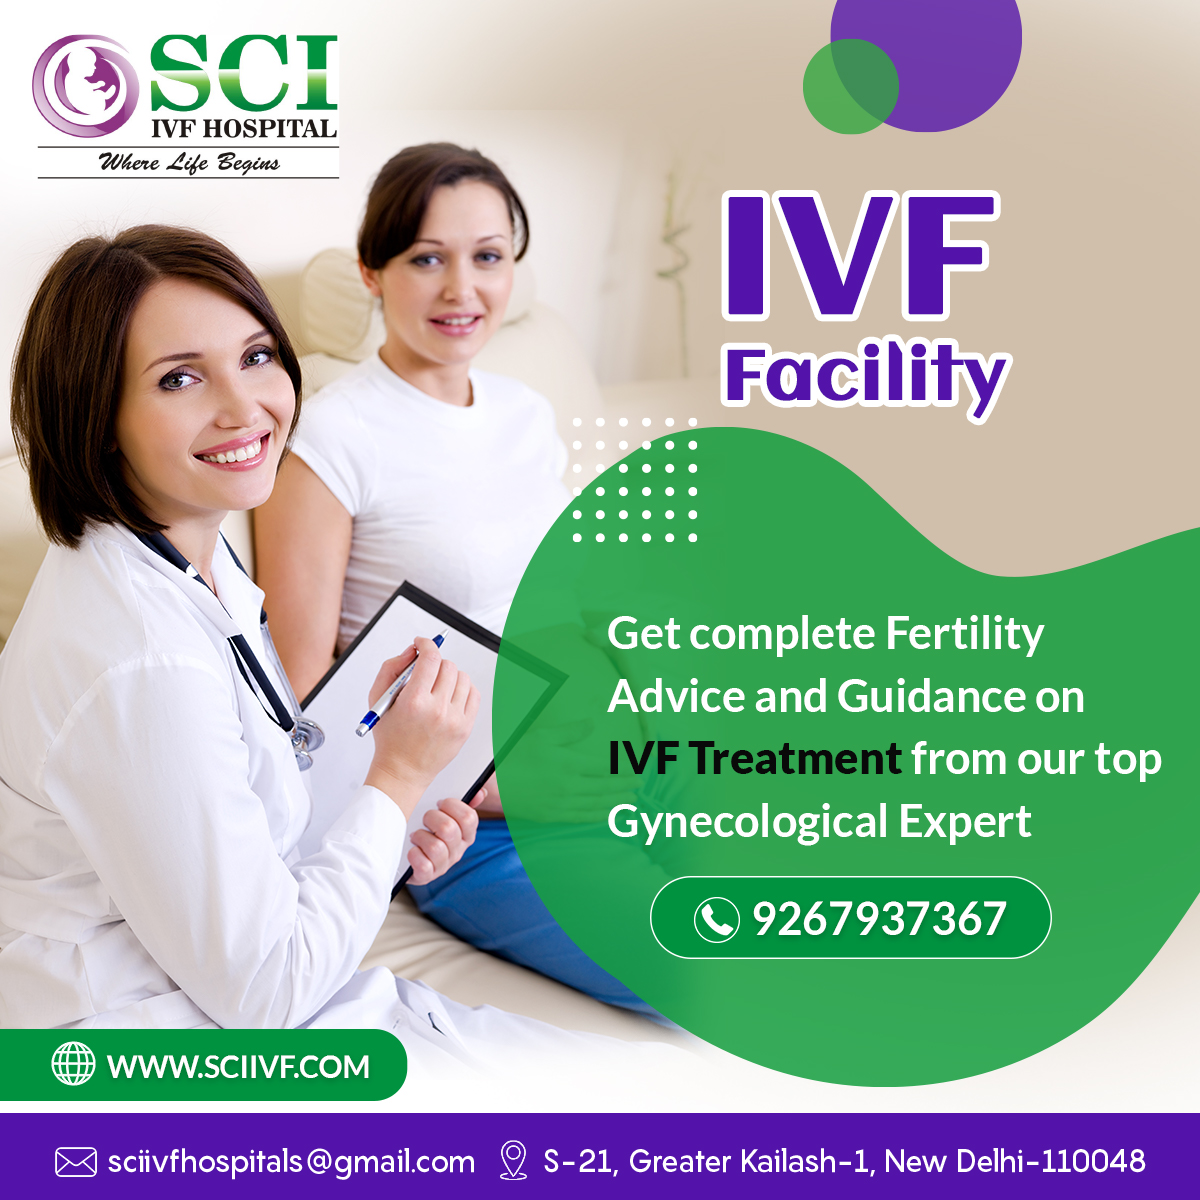 SCI IVF Hospital is offering FREE consultations with our renowned IVF specialists! Whether you're exploring fertility options or ready to take the next step, we're here to support you. Book your consultation now! +𝟗𝟏-𝟗𝟐𝟔𝟕𝟗𝟑𝟕𝟑𝟔𝟕 #IVF #Infertility #SCIIVF #IVFCost